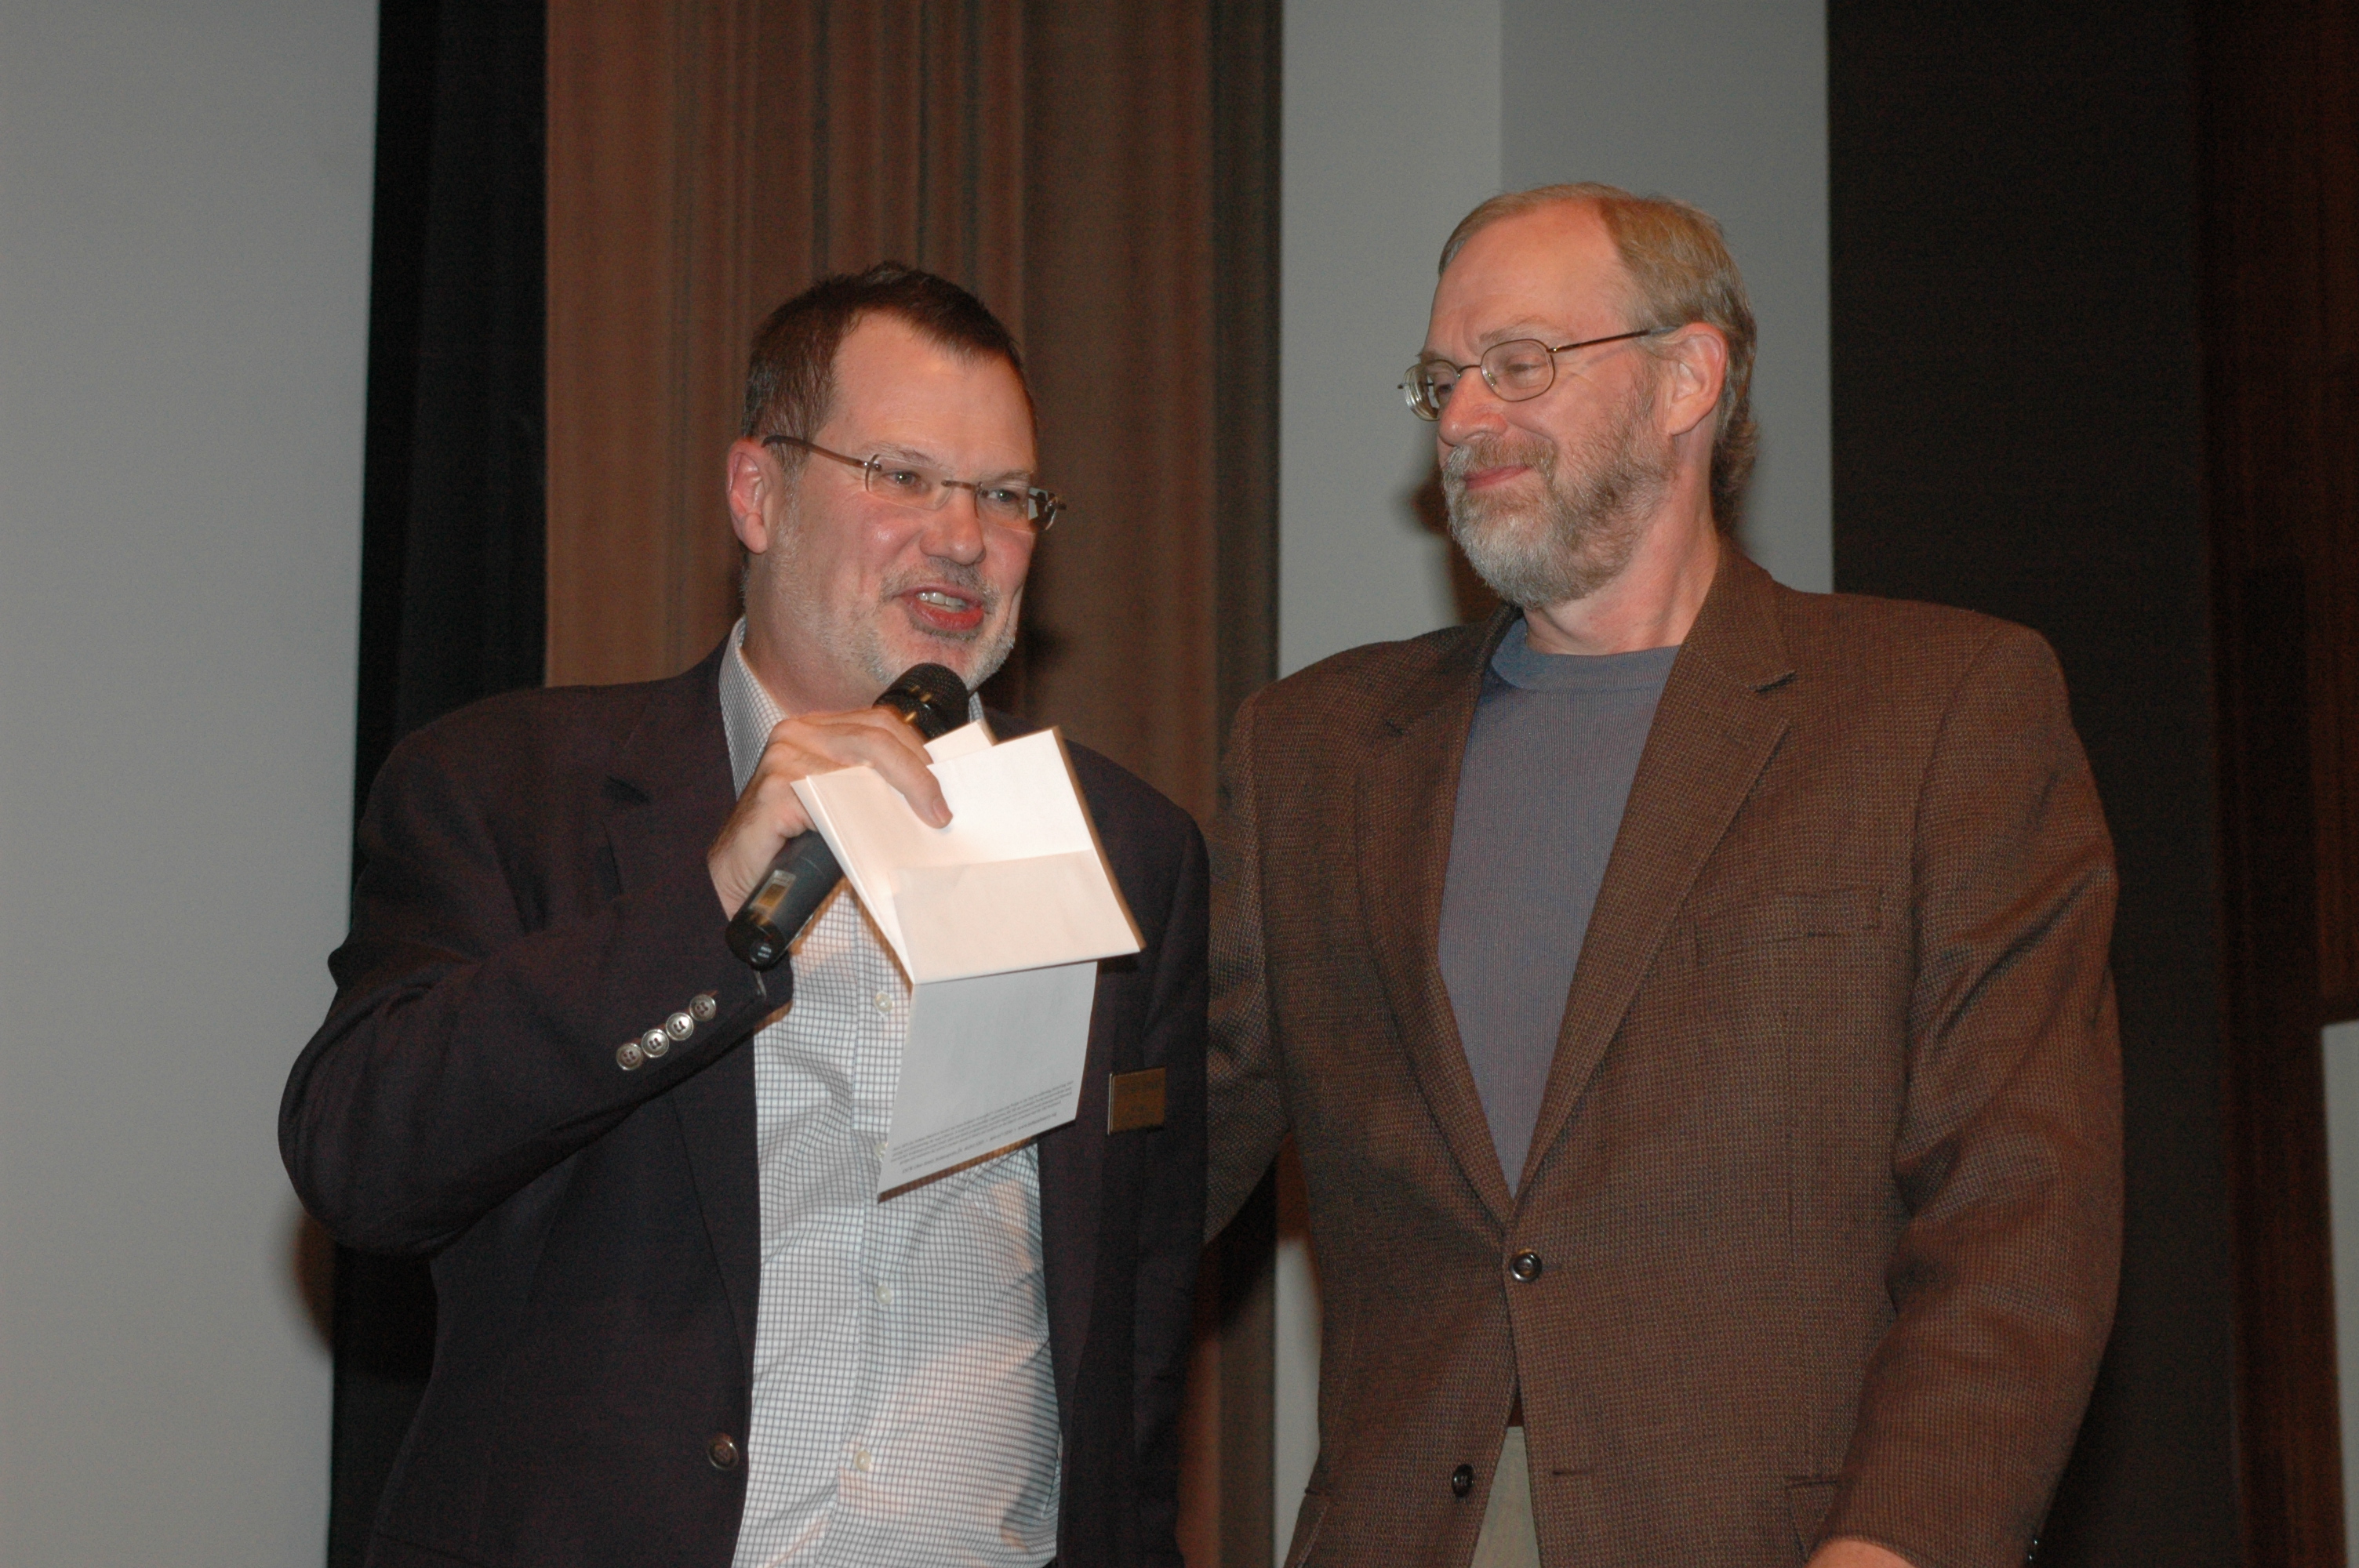 Jeff Sparks presents Donald Boggs with the 2008 Heartland Film Festival Audience Choice Award